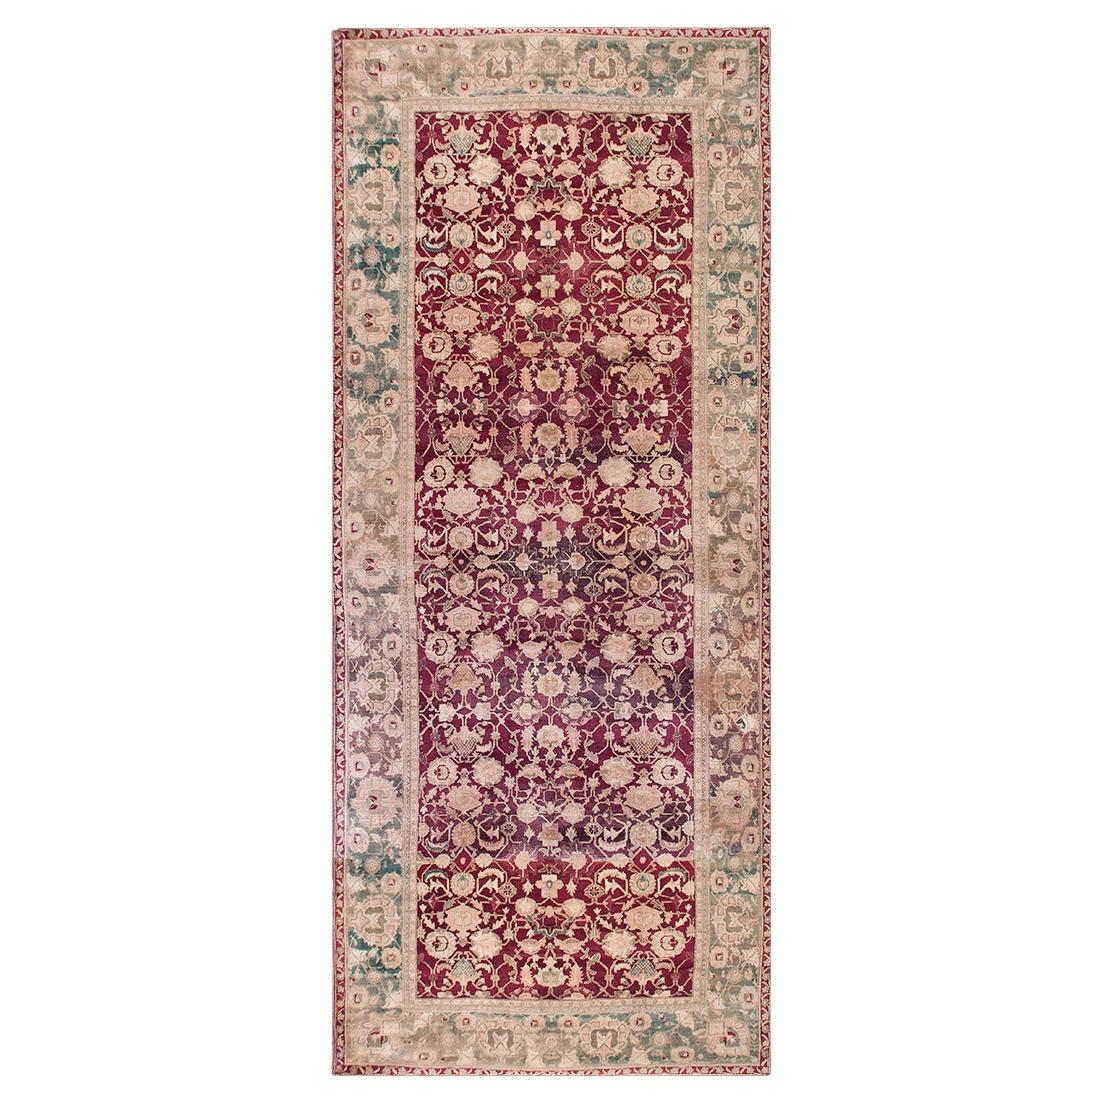 19th Century N. Indian Agra Gallery Carpet ( 8' x 27'2" - 244 x 828 ) For Sale